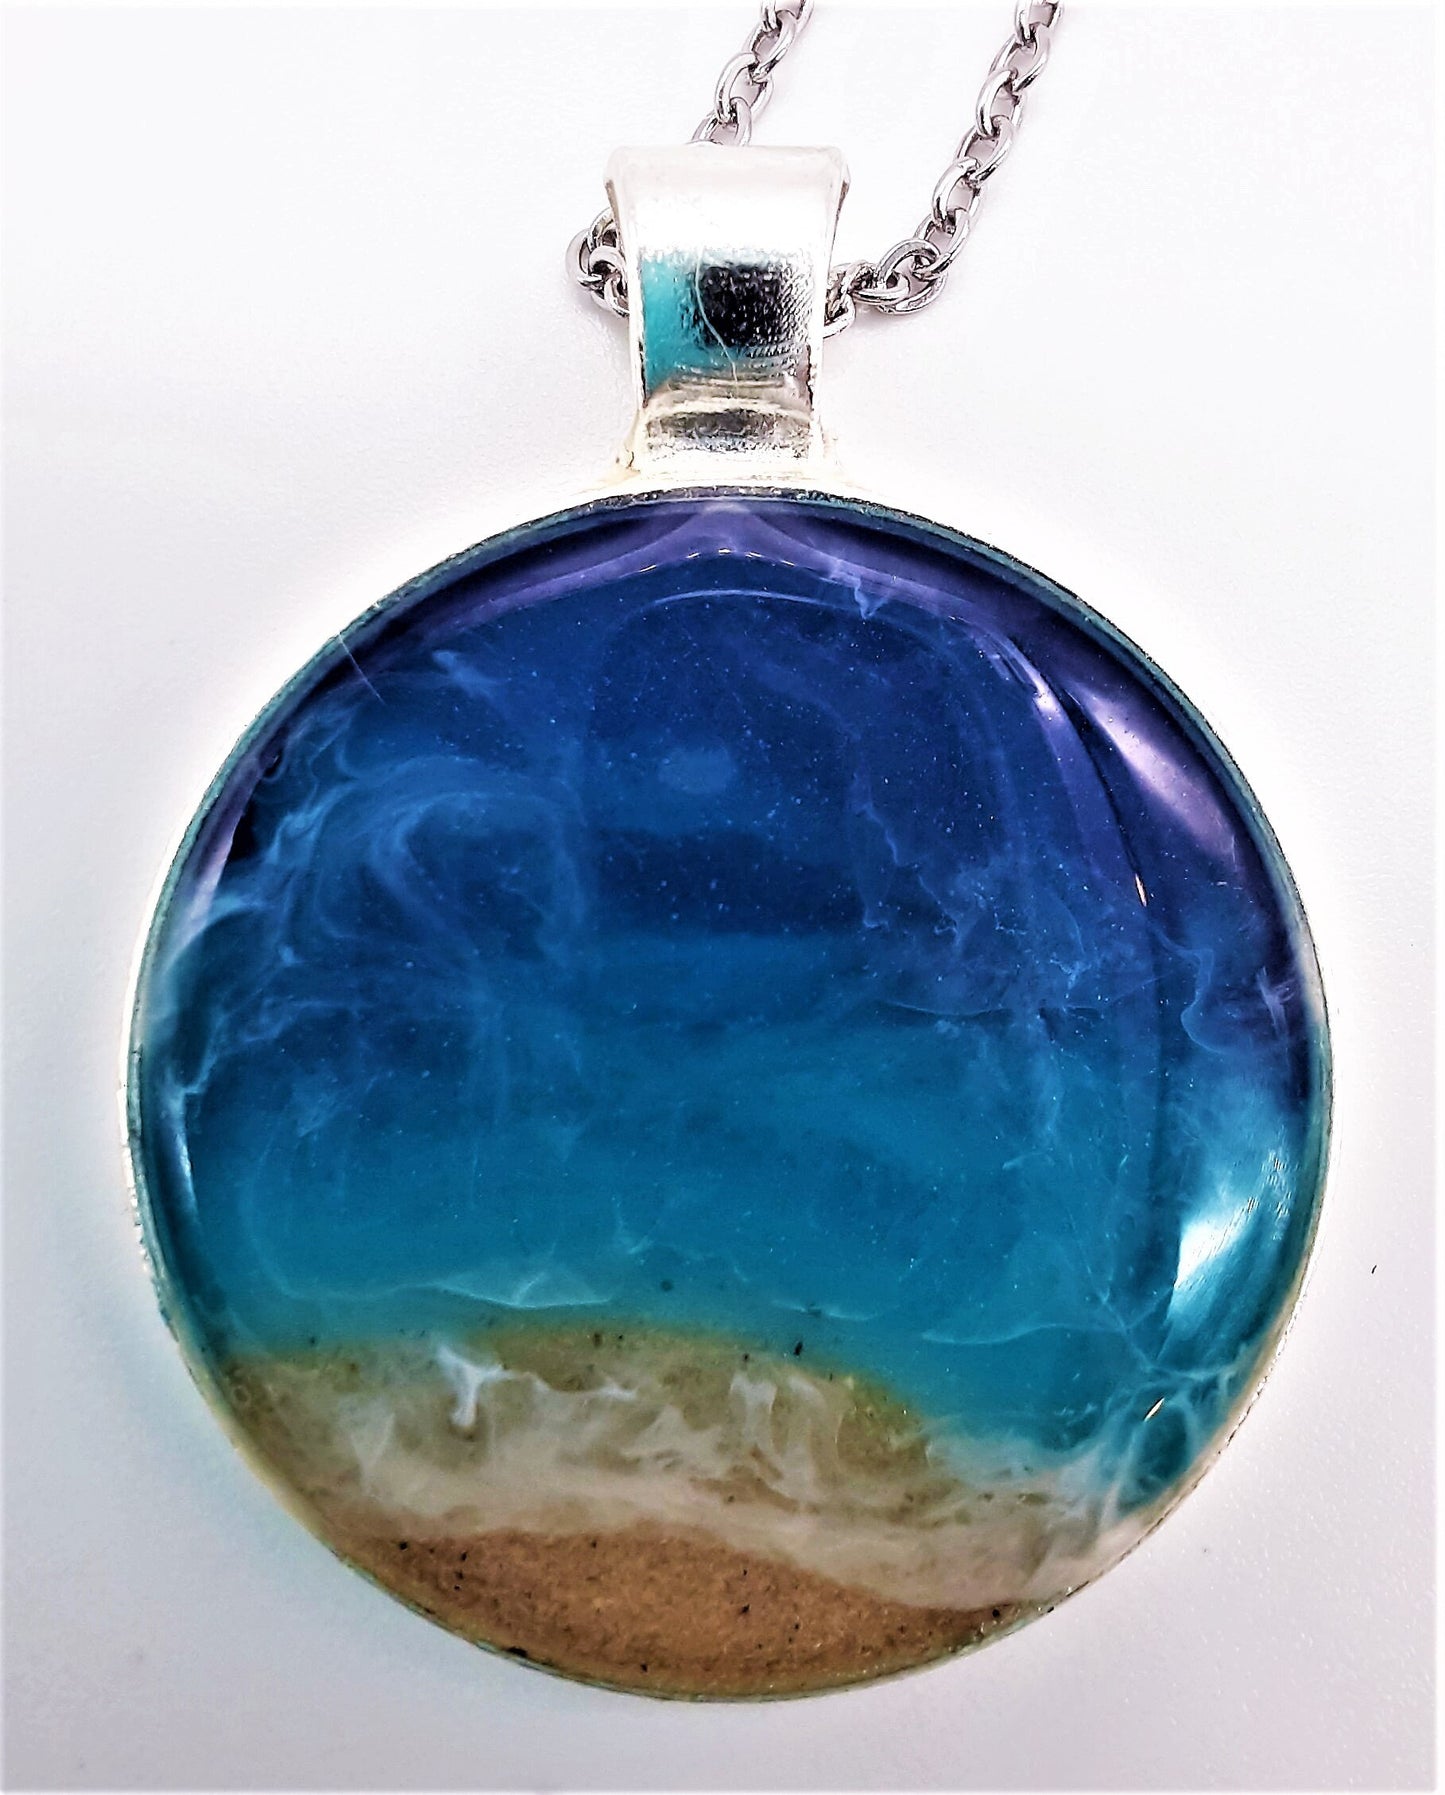 Resin Waves Round Shaped Ocean Pendant / Beach Scene Necklace, Handmade Made with Resin & Real Sand - One of a Kind - Not a Photograph!